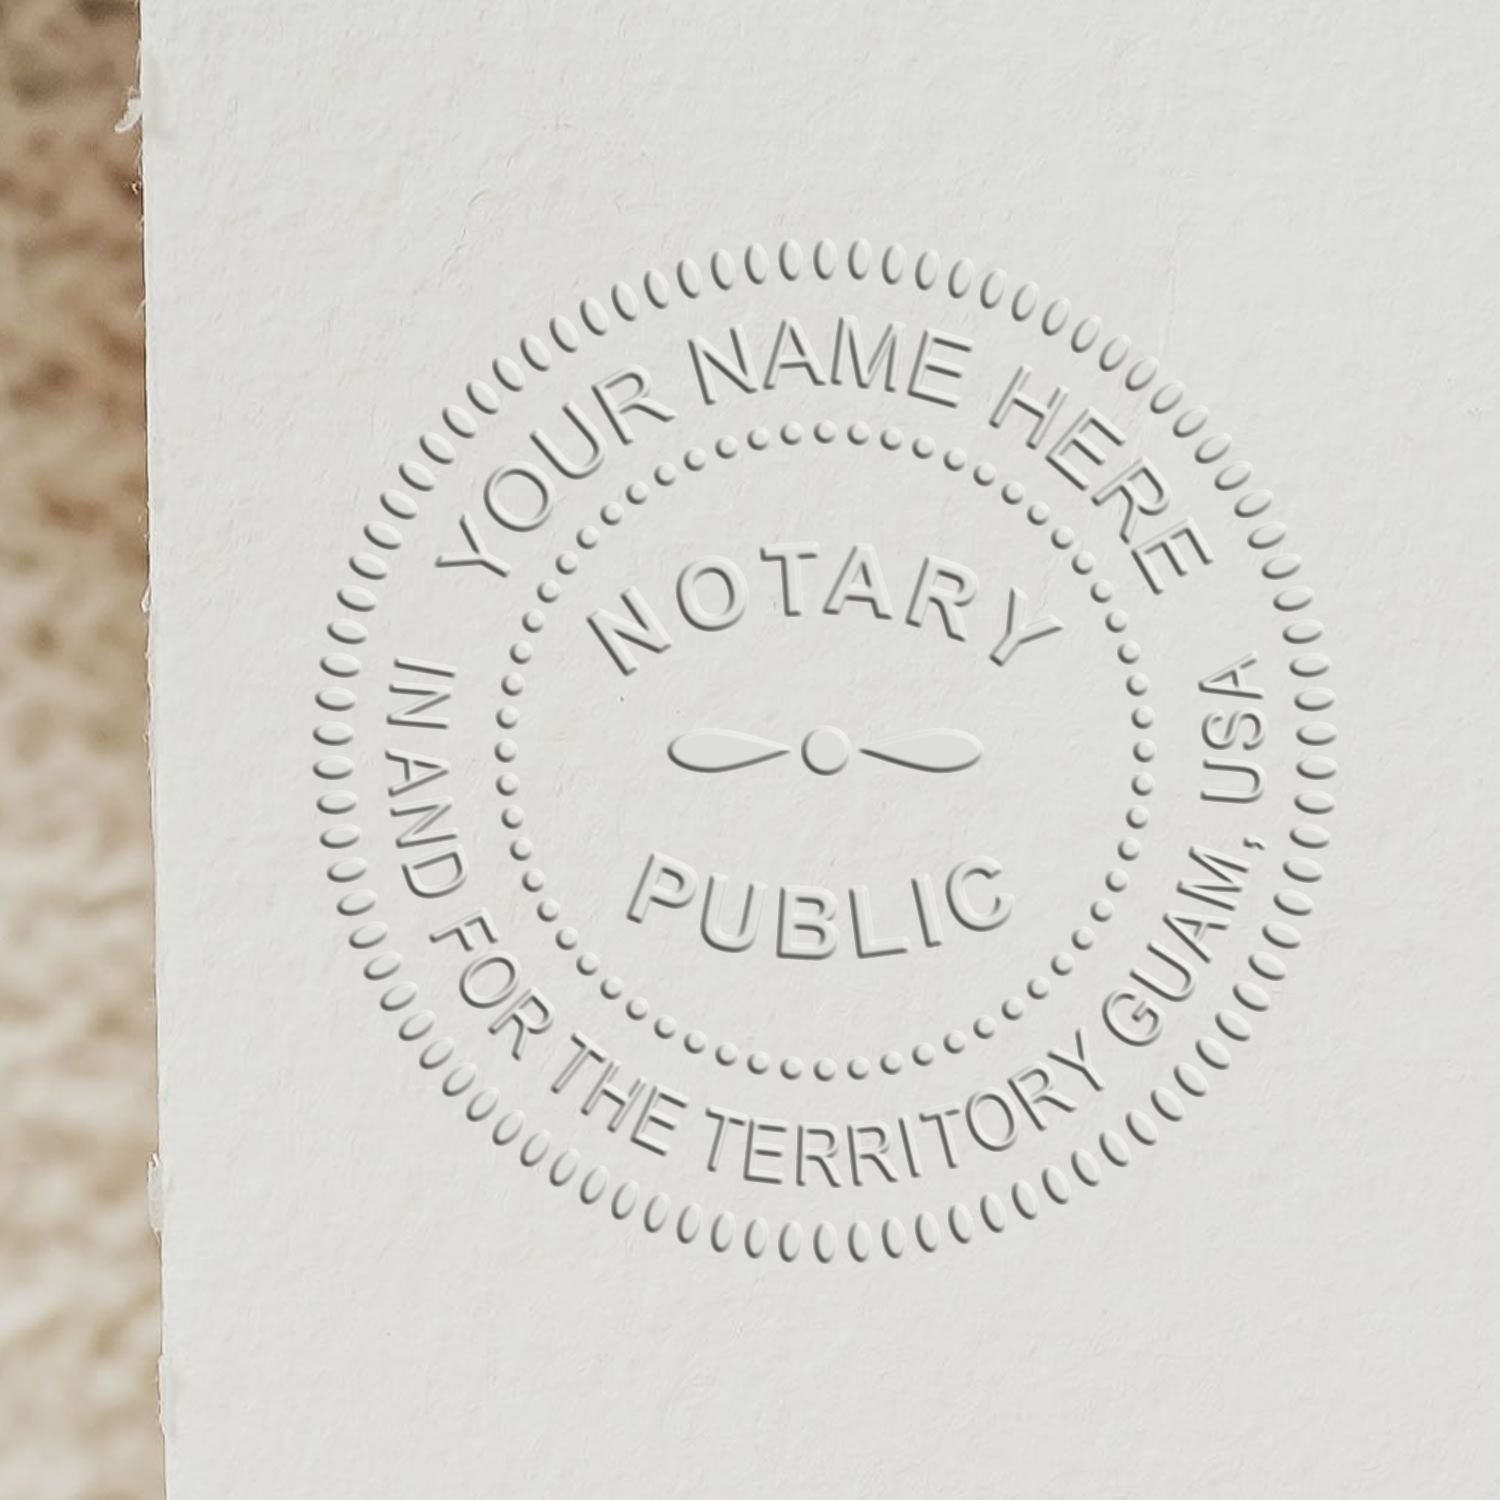 What's the difference between ink stamp and embosser Notary seals?